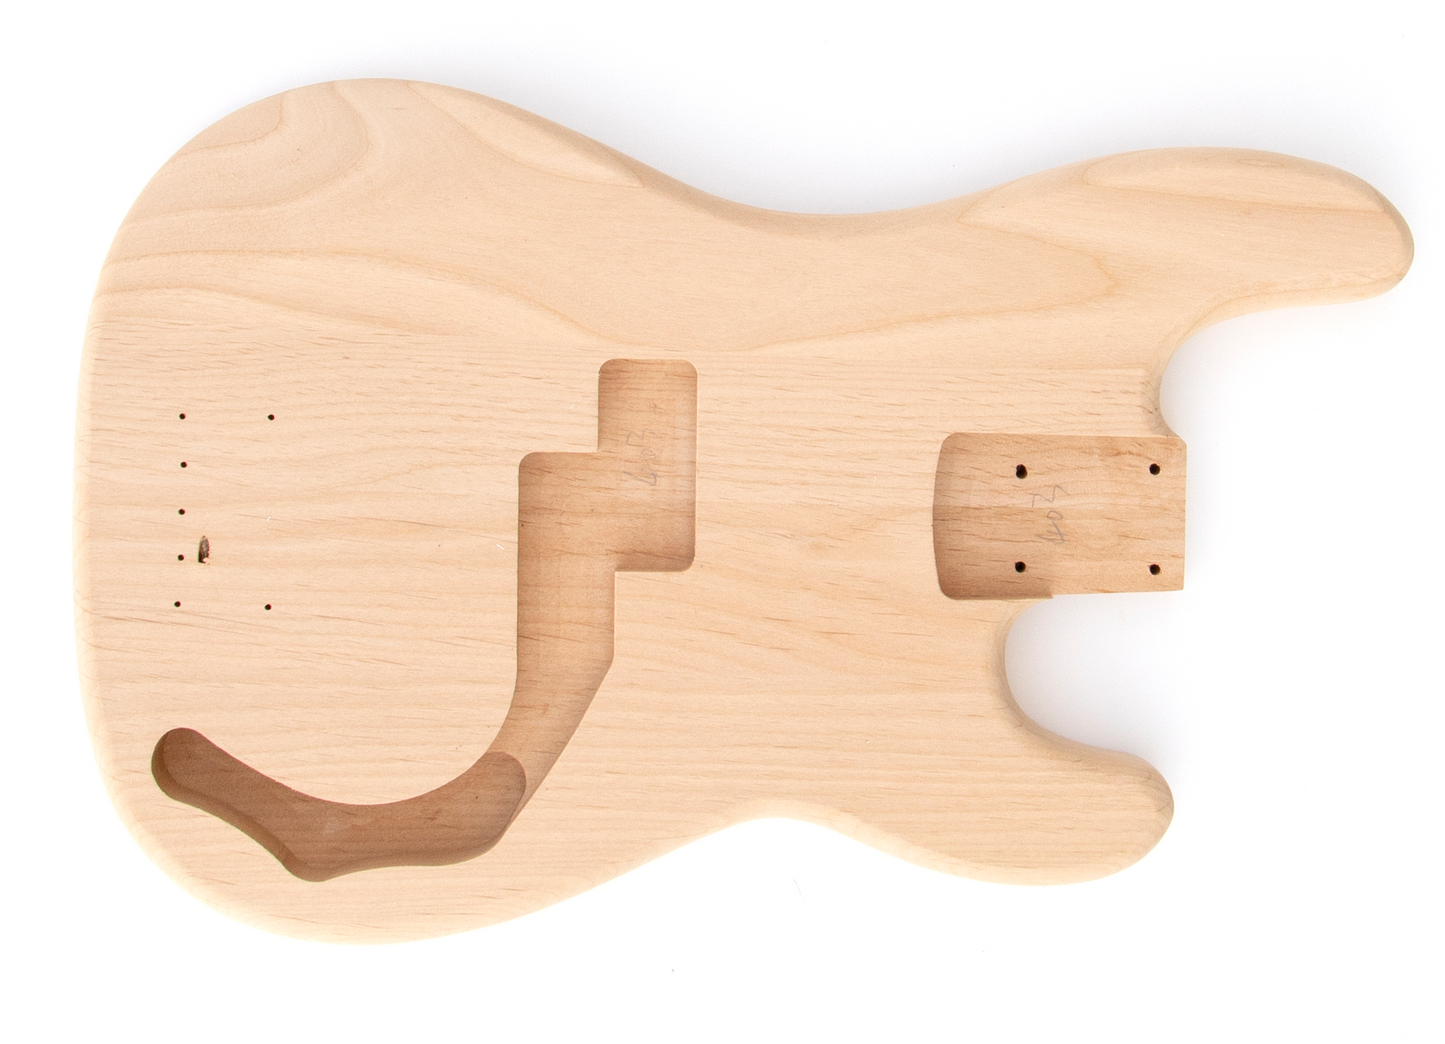 PB Style Build Your Own Bass Guitar Kit